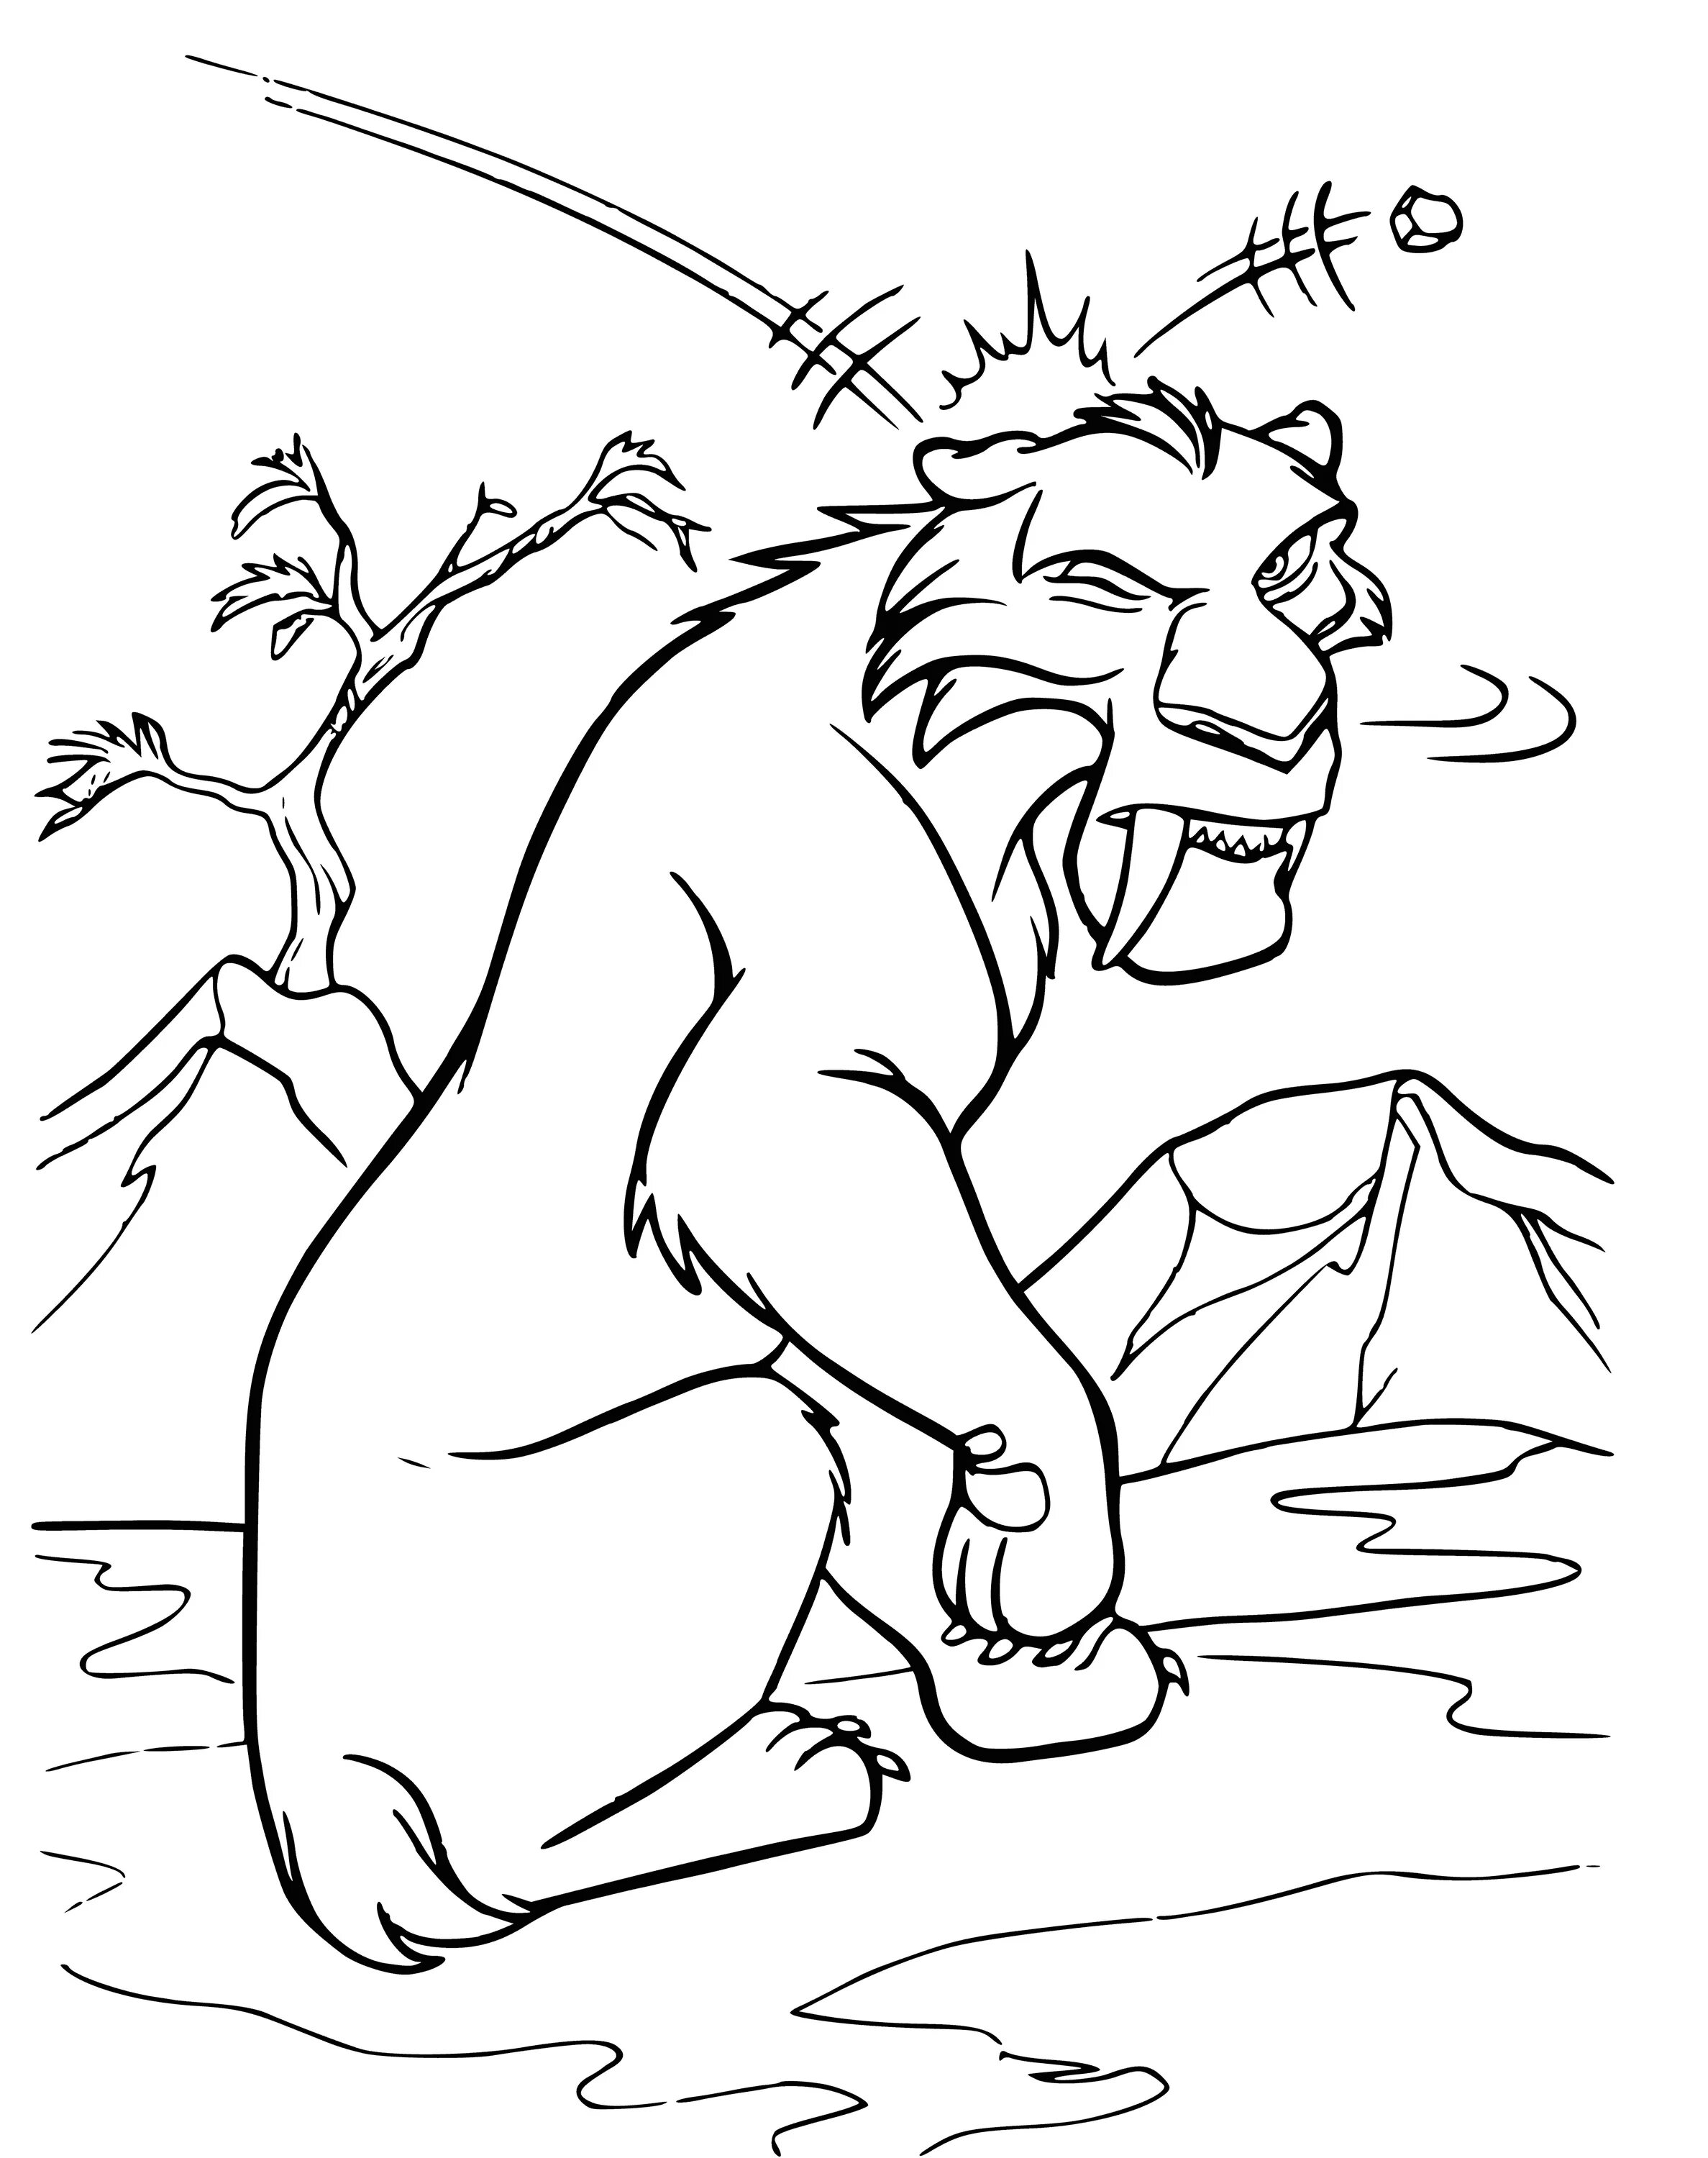 Wacky diego ice age coloring page